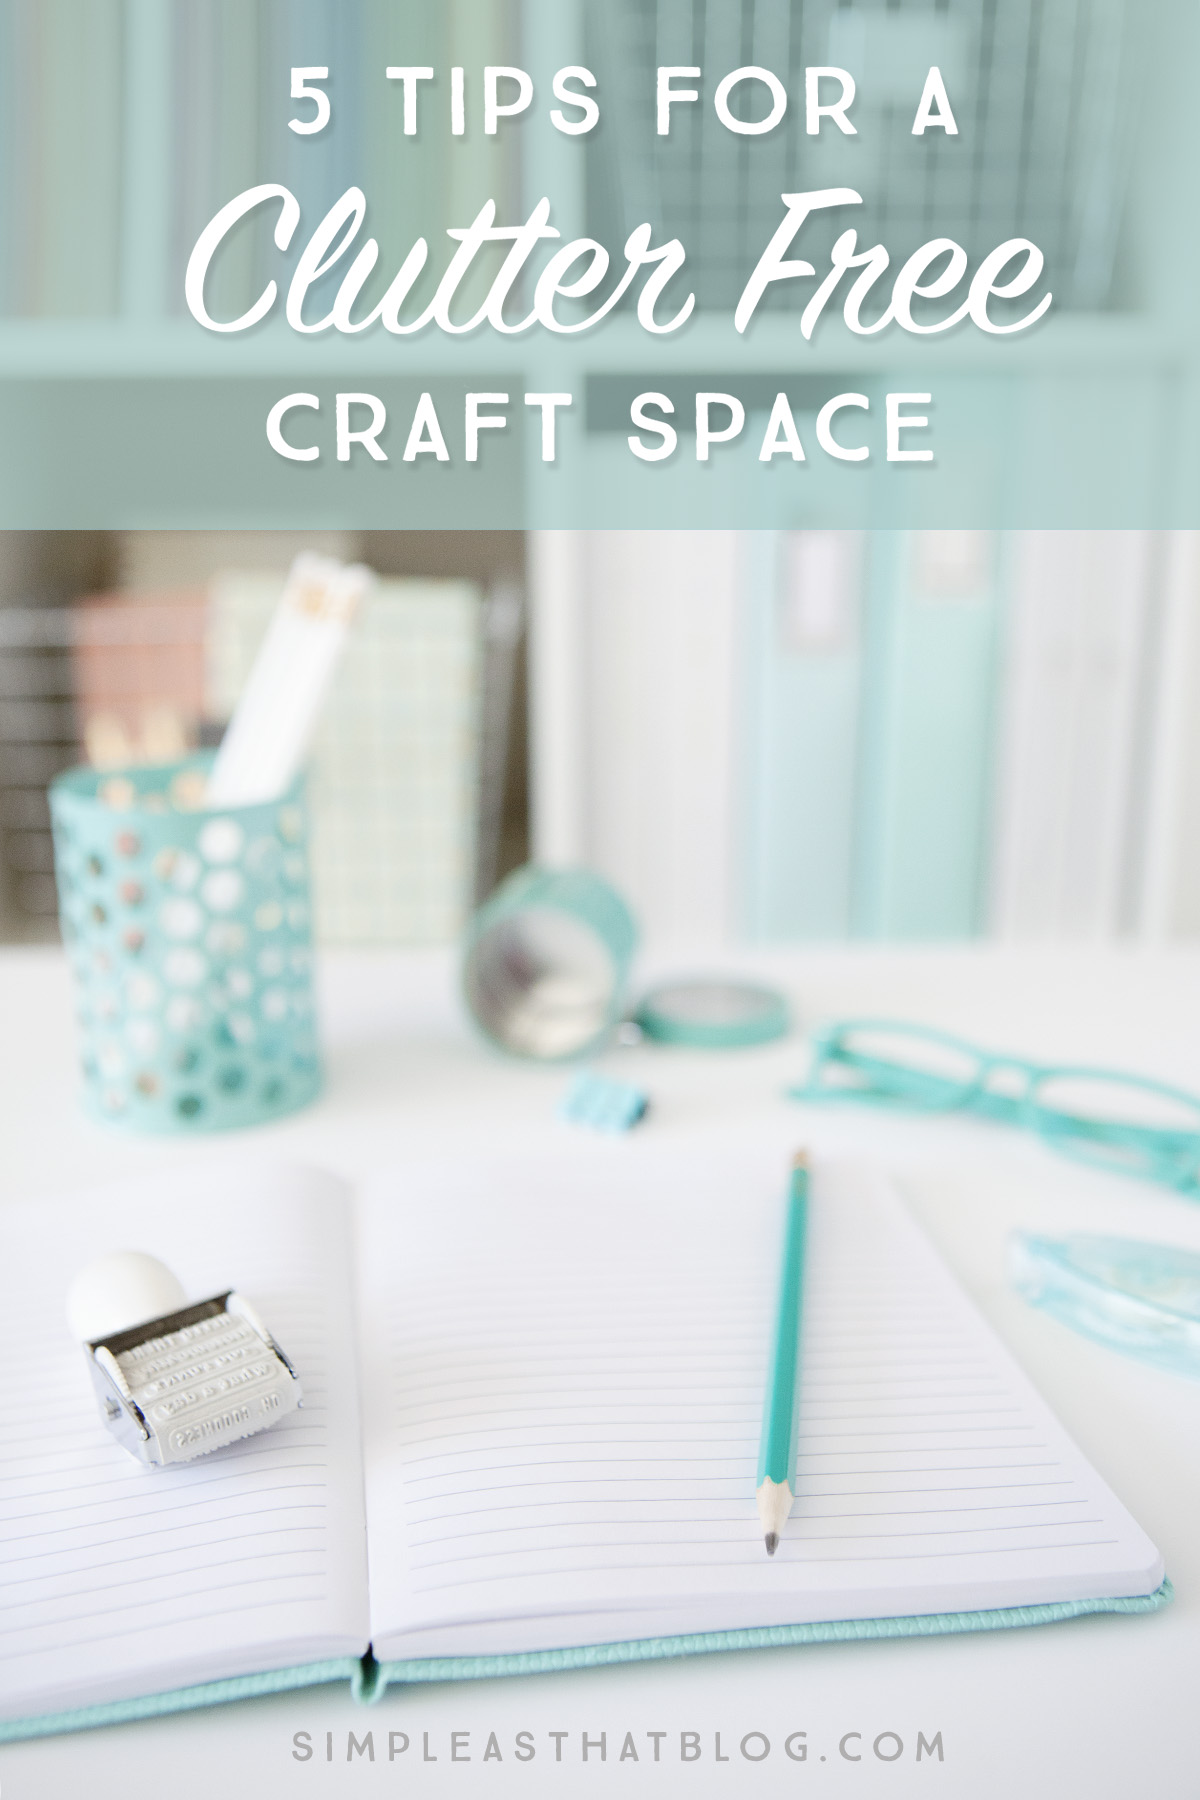 Keep your crafty clutter under control with these simple tips. As you free up your craft space you'll find more room to be creative!